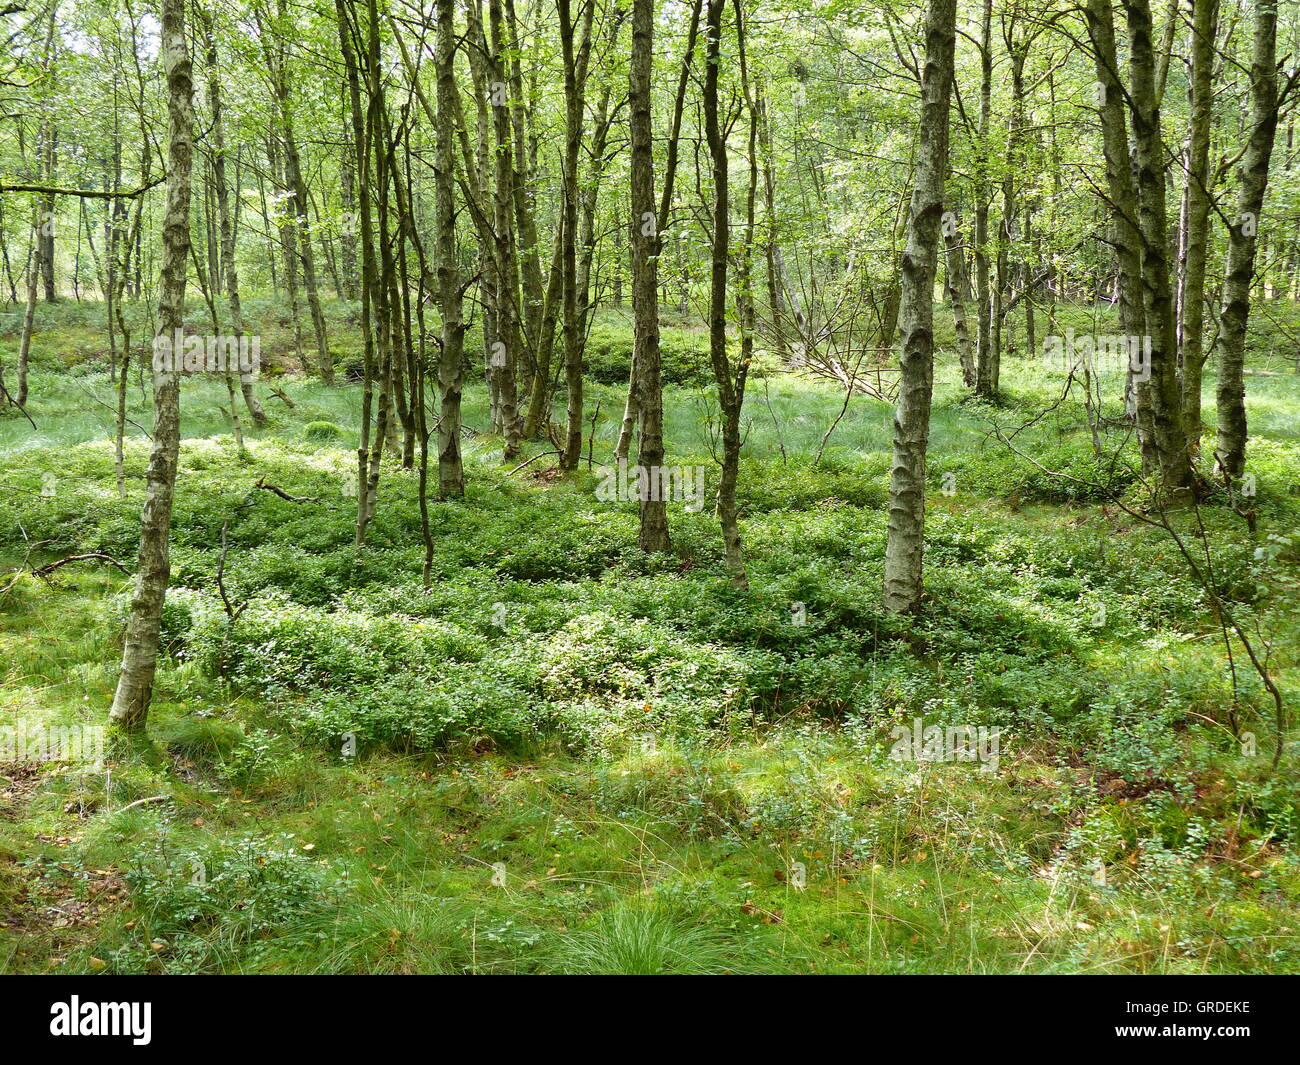 Downy Birch Trees, Grasses, Blueberry Plants In The Red Moor, Rhoen, Hesse, Germany, Europe Stock Photo